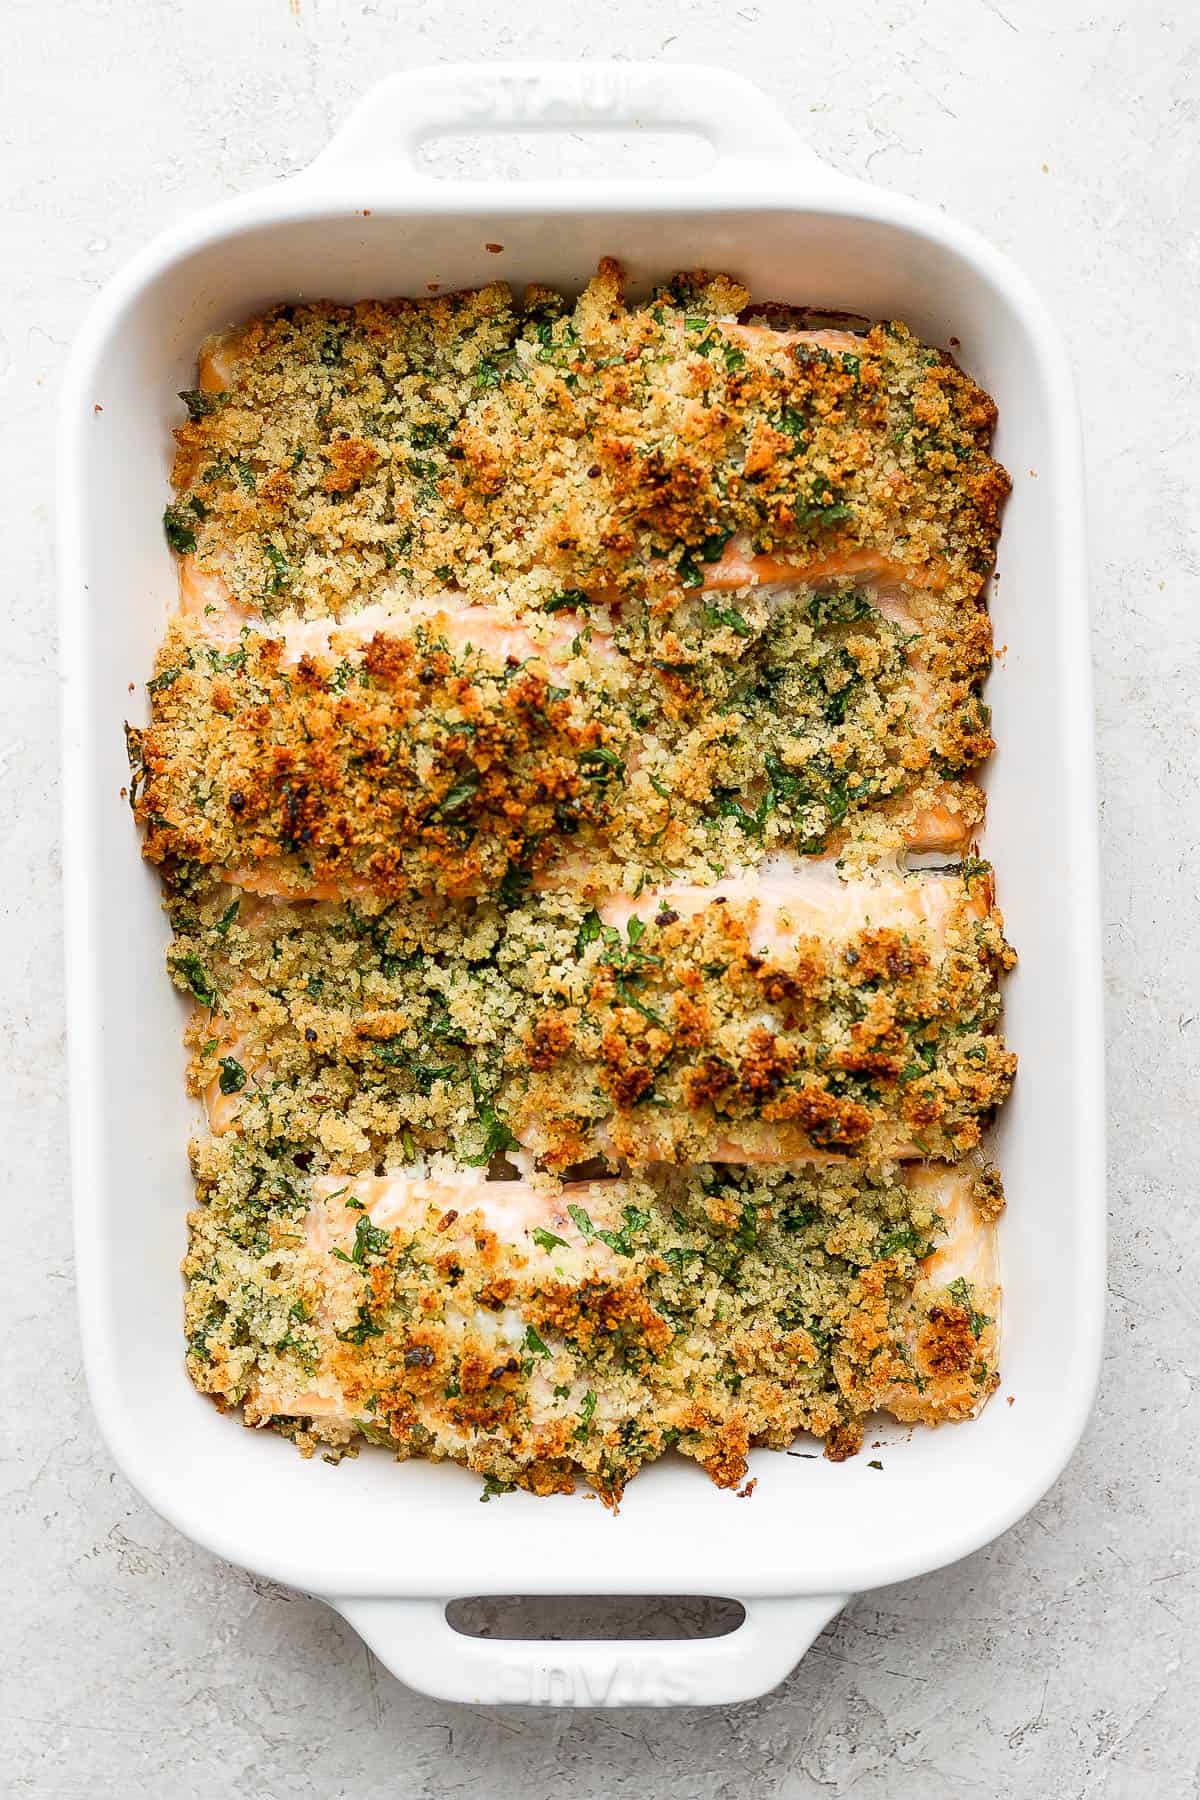 Baked Salmon fillets topped with the panko seasoning mixture.